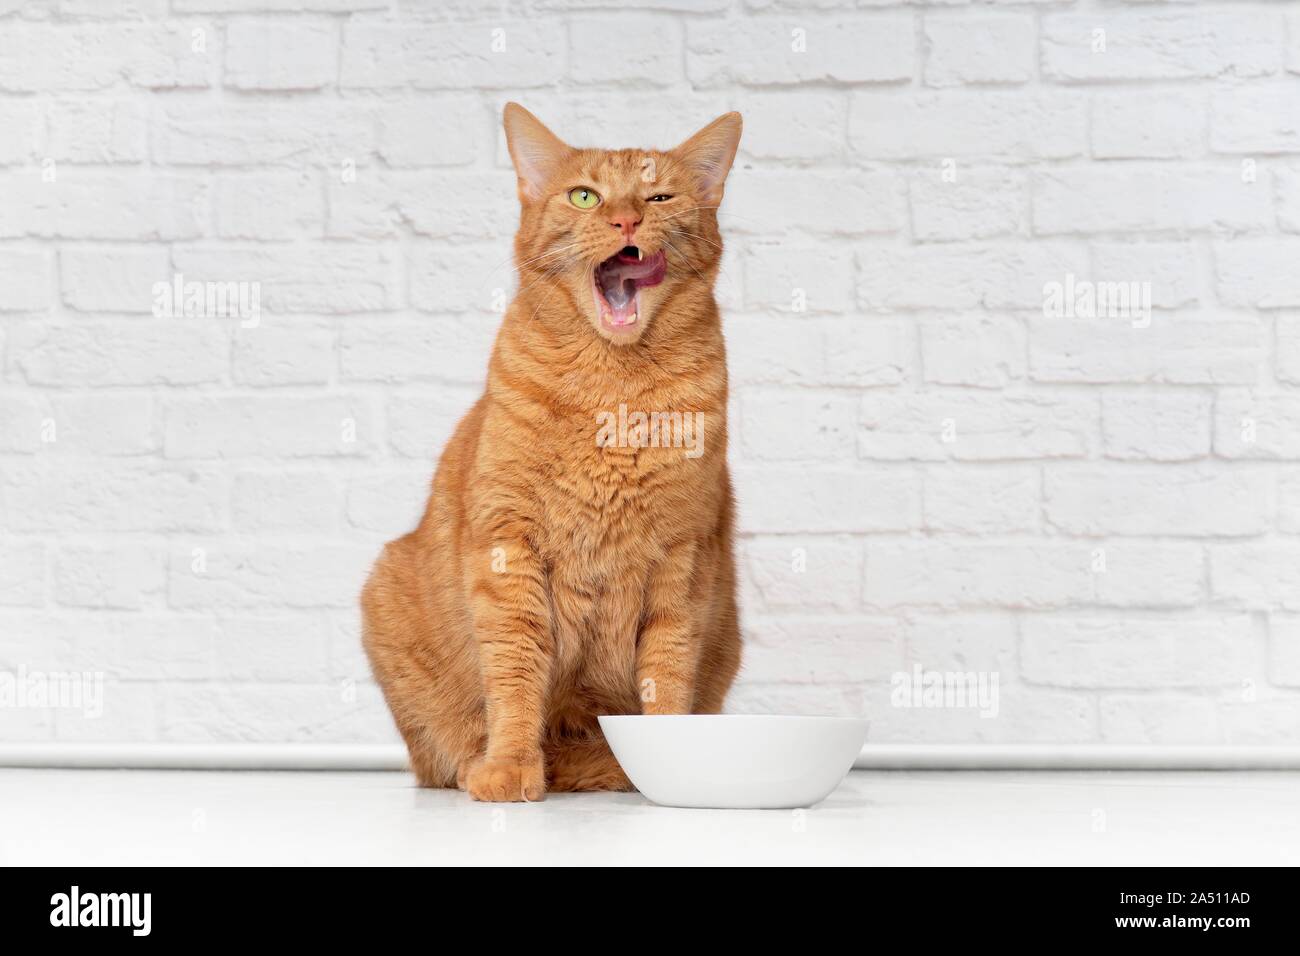 Funny ginger cat licking his face next to a white food dish. Stock Photo